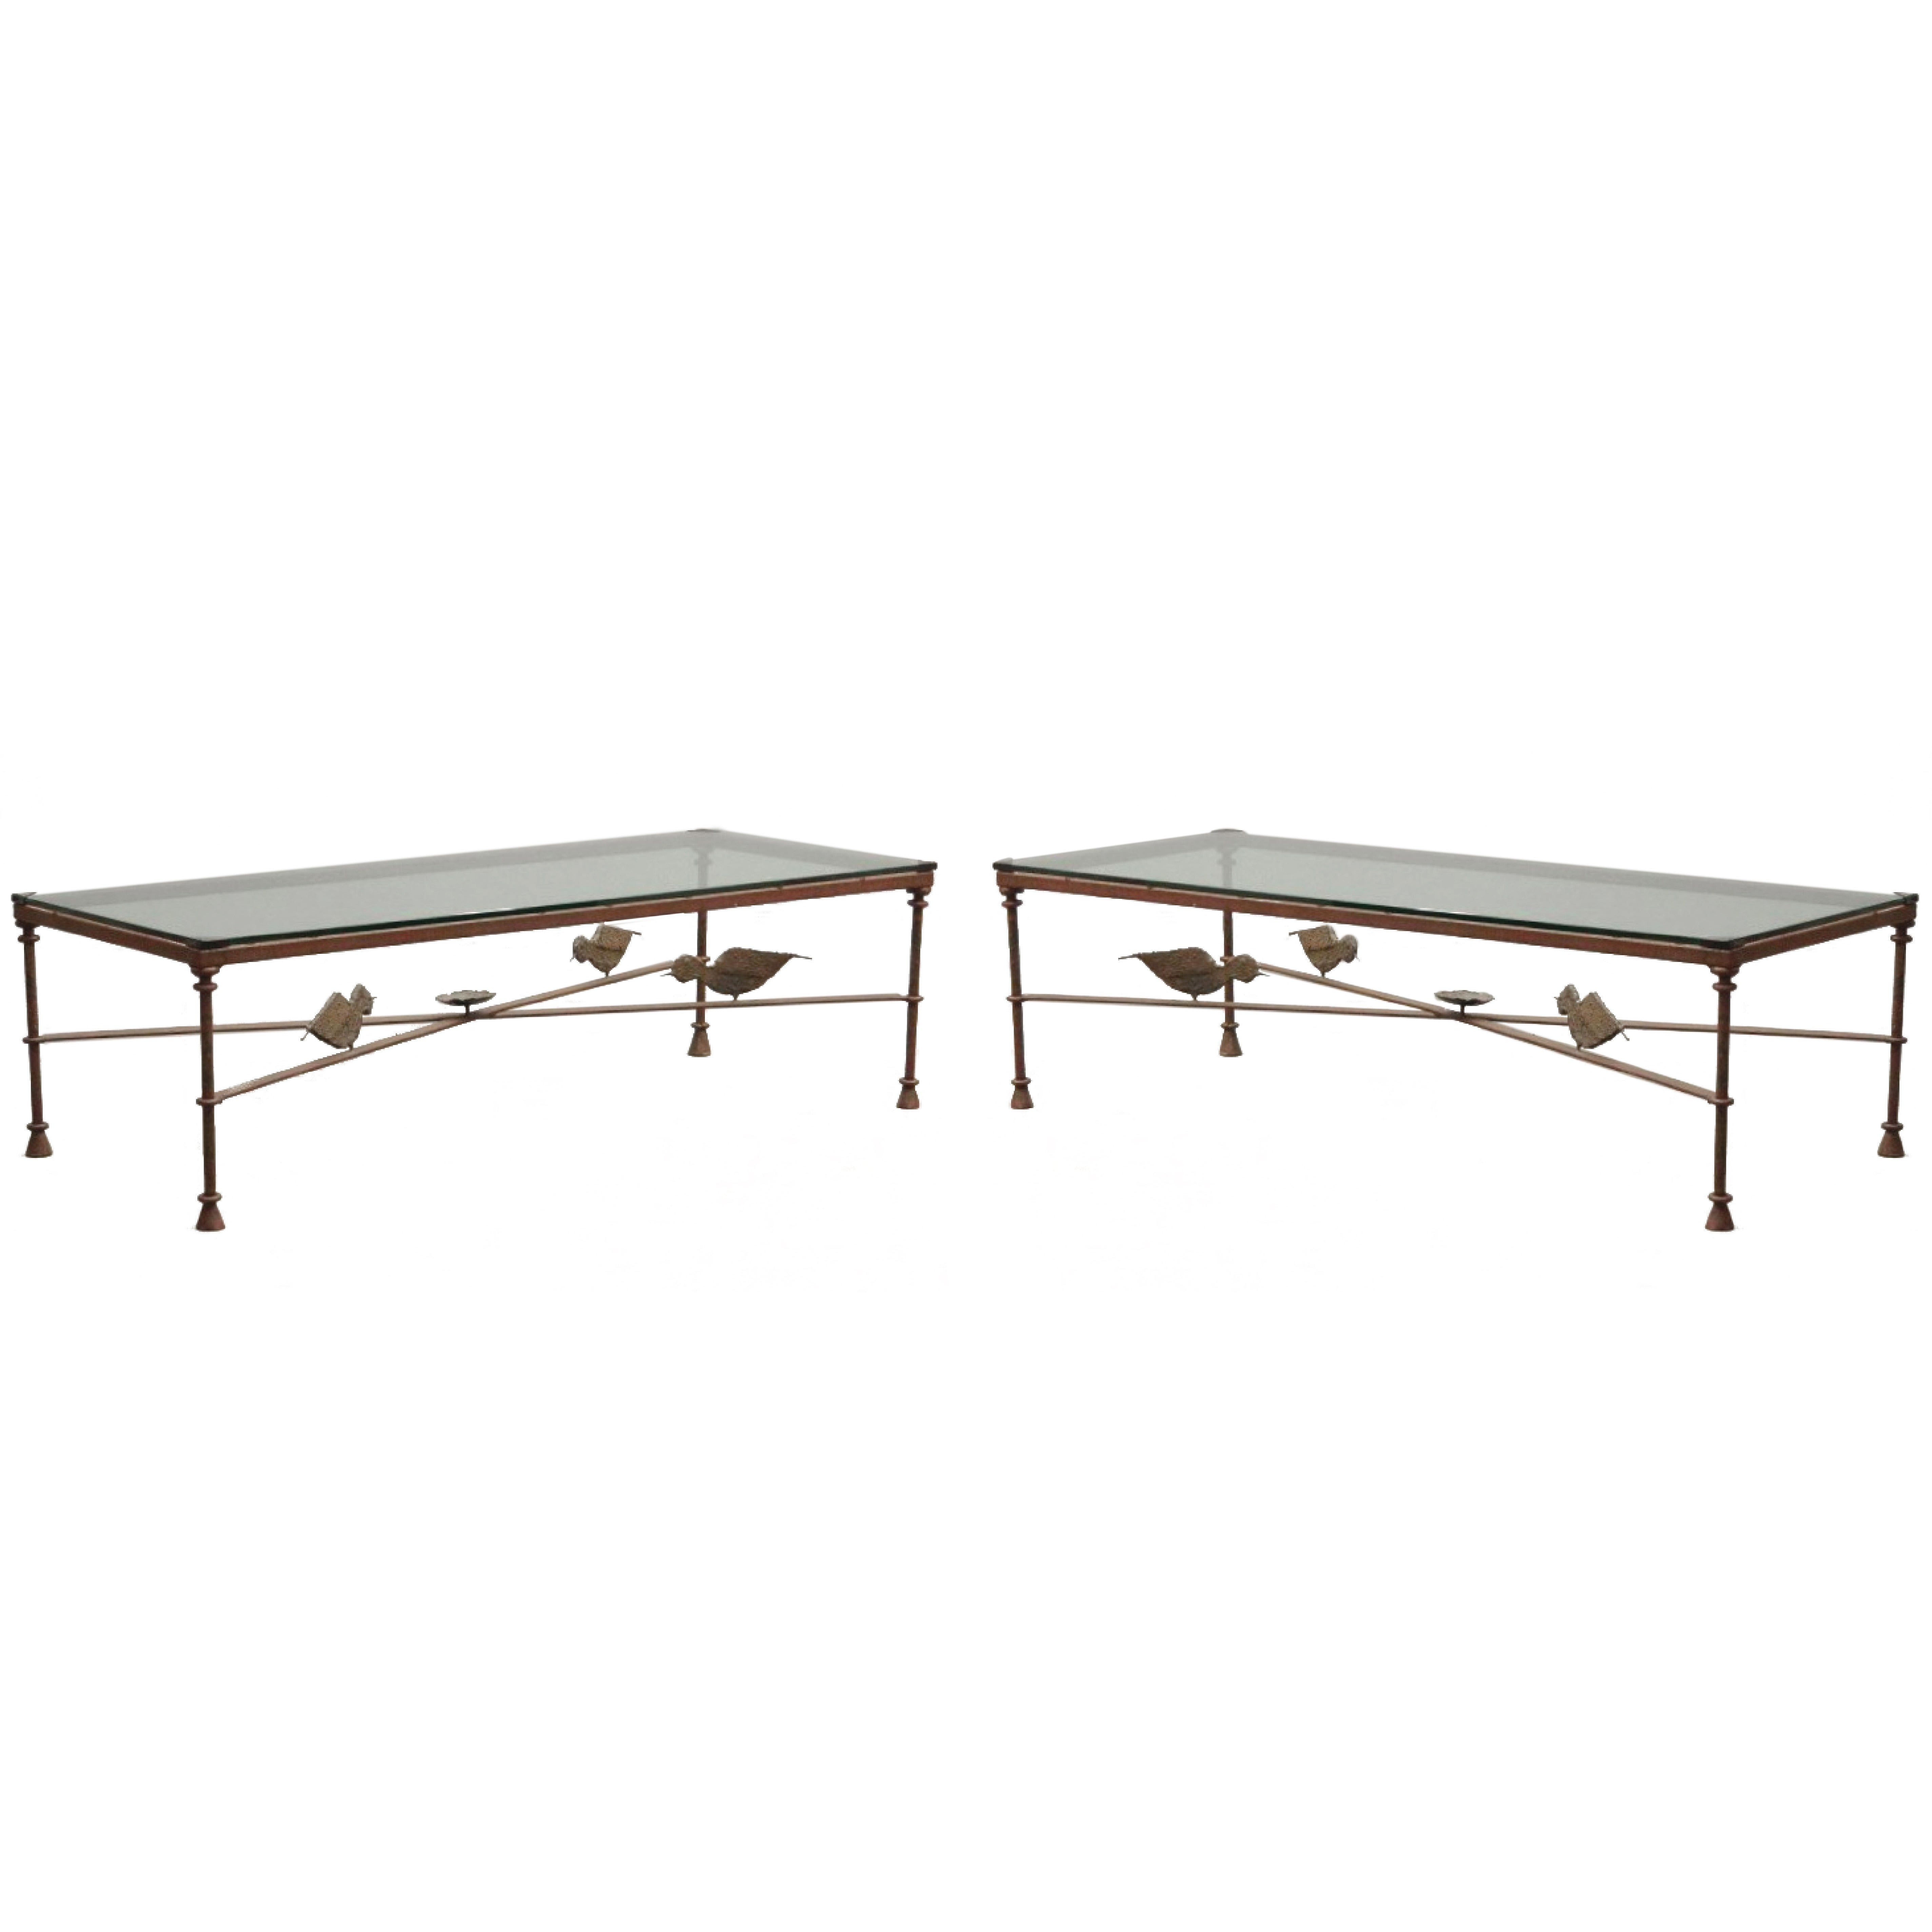 Pair of Wrought Iron Coffee Tables in the Manner of Giacometti